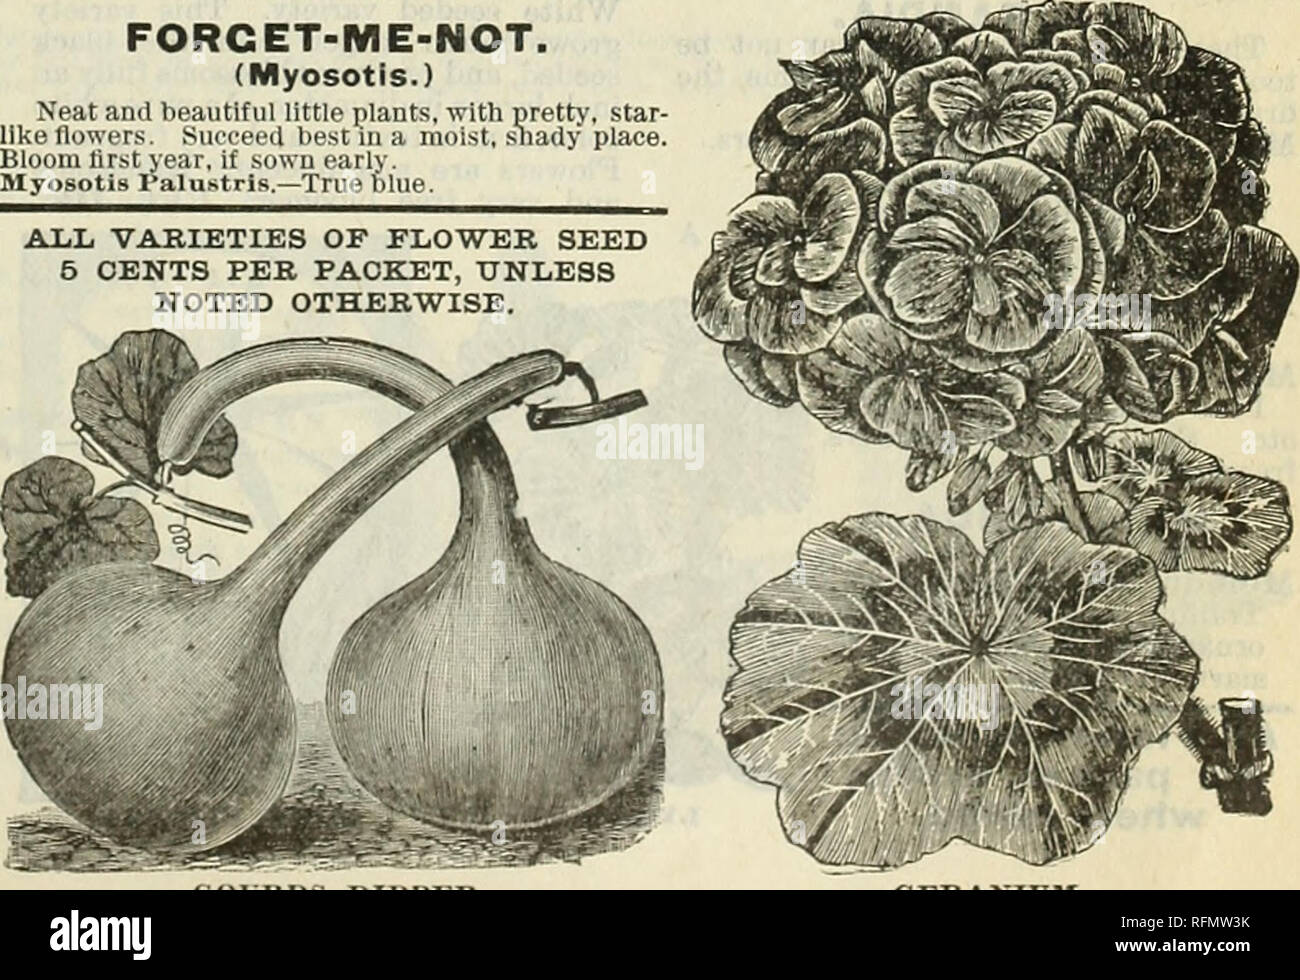 . Leonard's catalogue of seeds &amp; tools : 1899. Nursery stock Illinois Chicago Catalogs; Flowers Seeds Catalogs; Vegetables Seeds Catalogs; Agricultural implements Catalogs. FORGET-JIE-NOT. FORGET-ME-NOT. (Myosotfs.) Neat and beautiful little plants, with pretty, star like flowers. Succeed best in a moist, snady place Bloom first year, if sown early. Myosotis Palustris.—True blue. ALL VARIETIES OP FLOWER SEED 6 CENTS PER PACKET, UNLESS NOTED OTHERWISE. GAILLARDIA LORENZIANA.. GOI RDS, DIPPE GERANIUM.. Please note that these images are extracted from scanned page images that may have been di Stock Photo